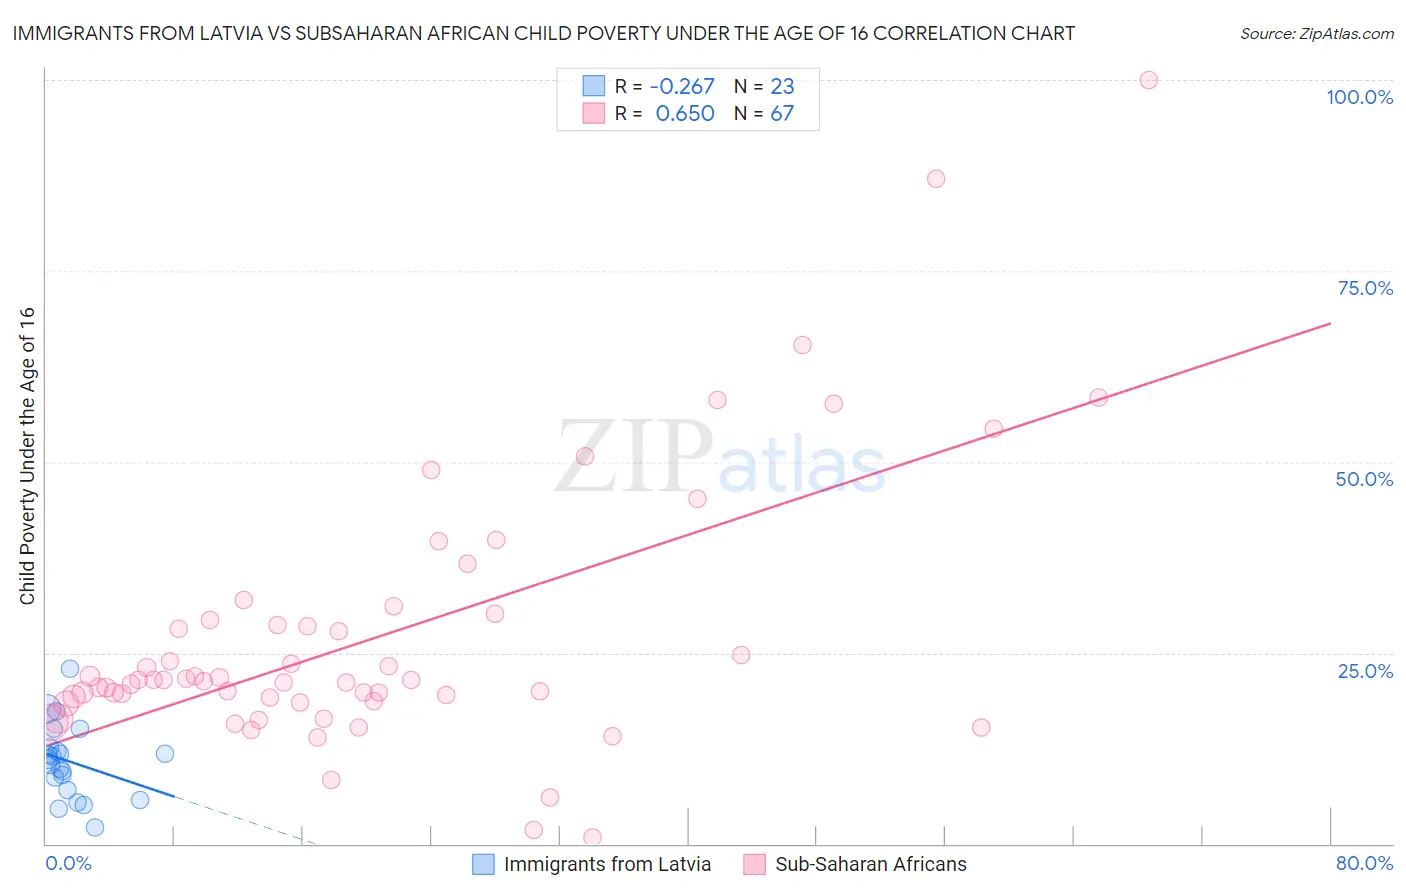 Immigrants from Latvia vs Subsaharan African Child Poverty Under the Age of 16